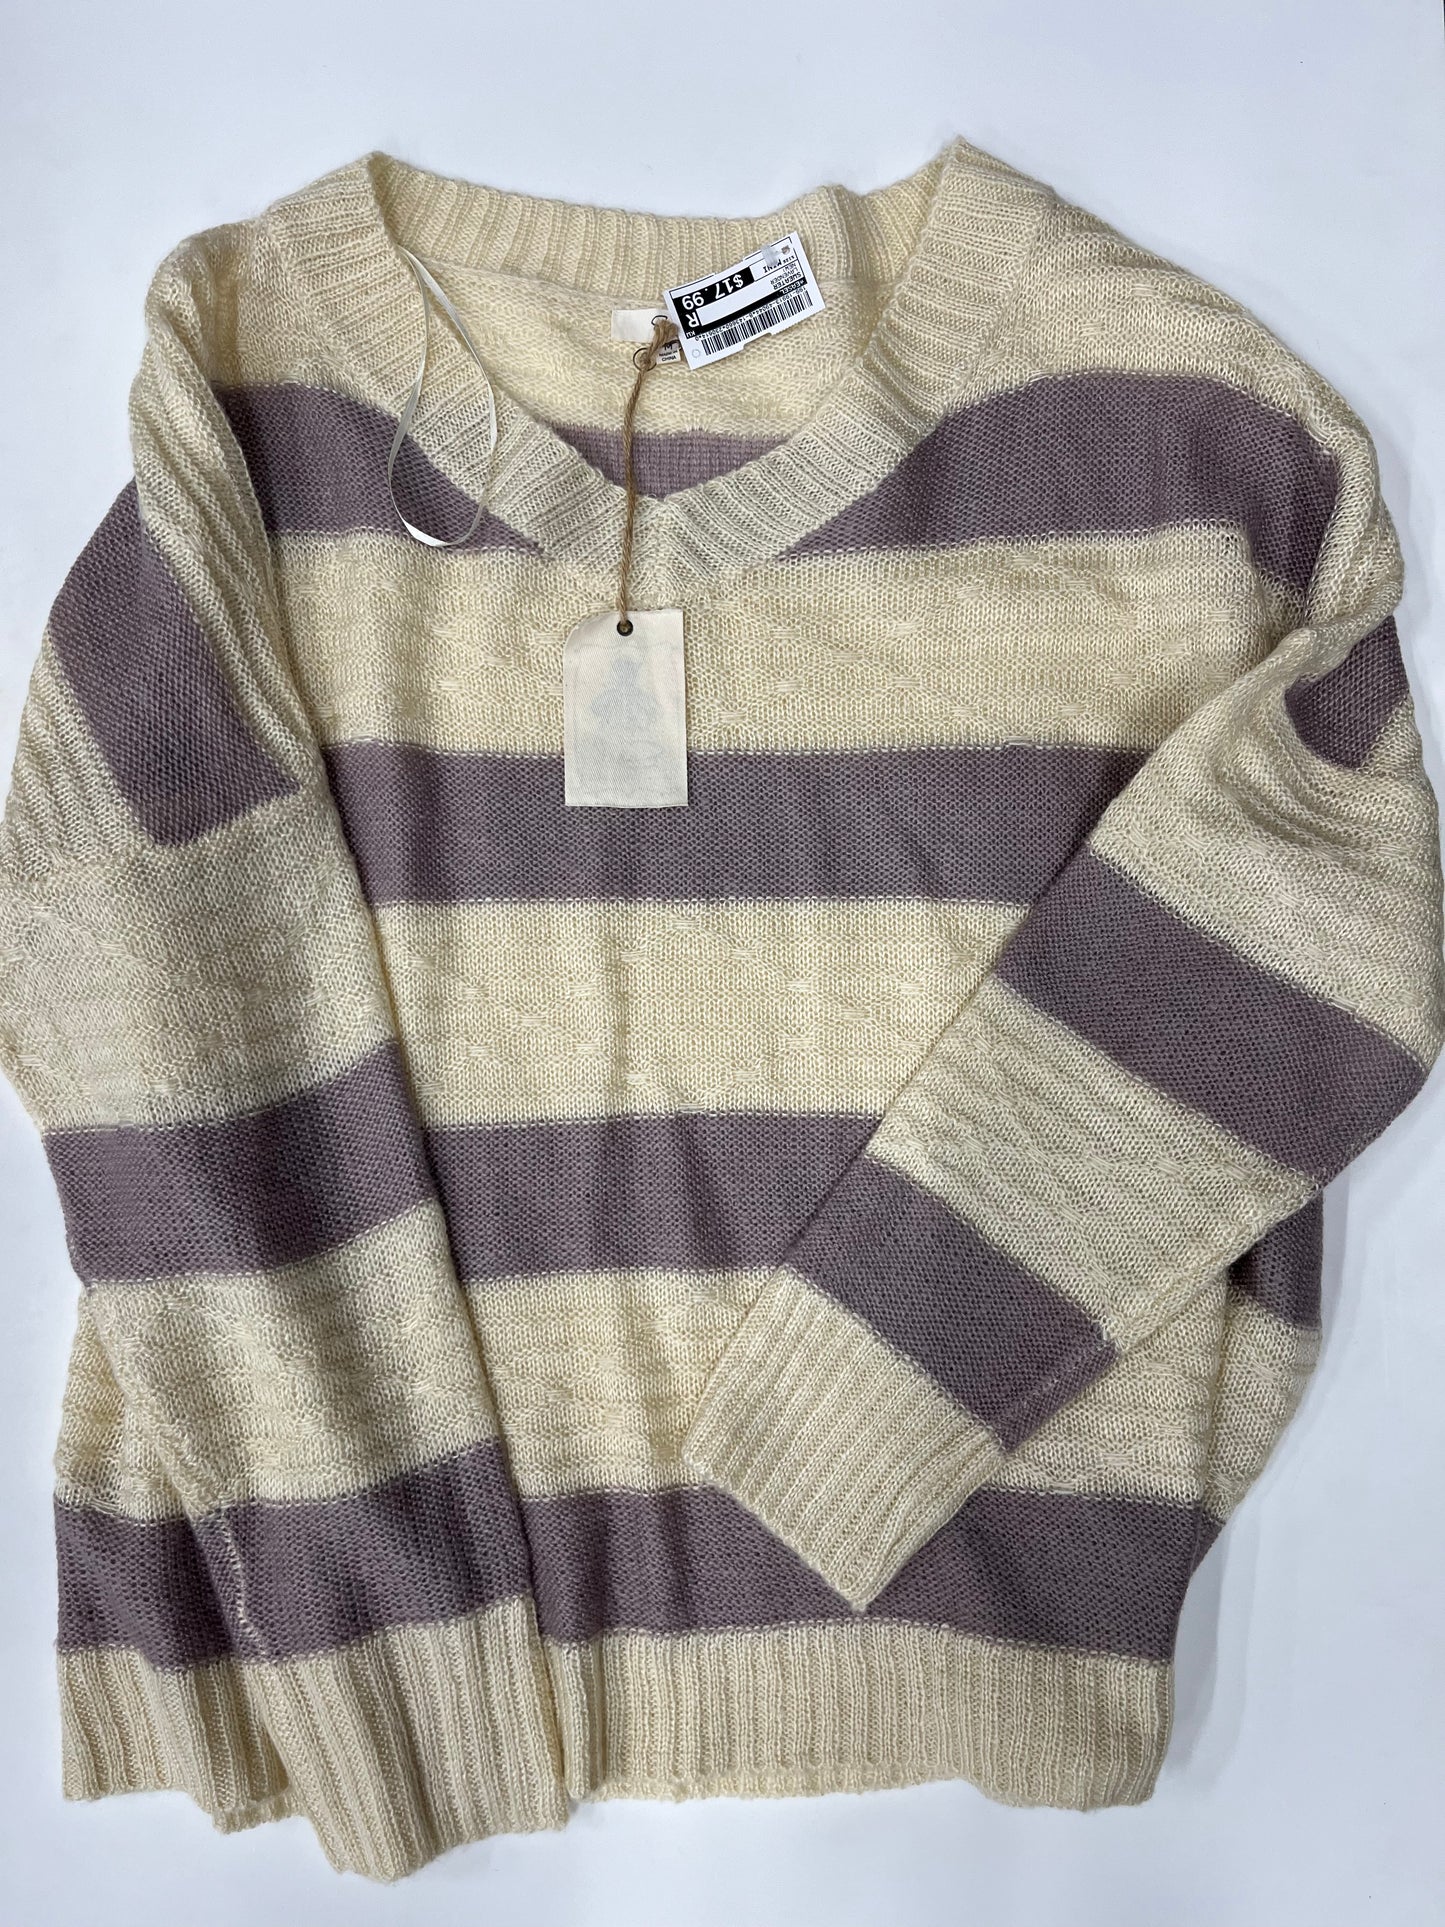 Easel Knit Long Sleeve Sweater Chevron NWT Size M